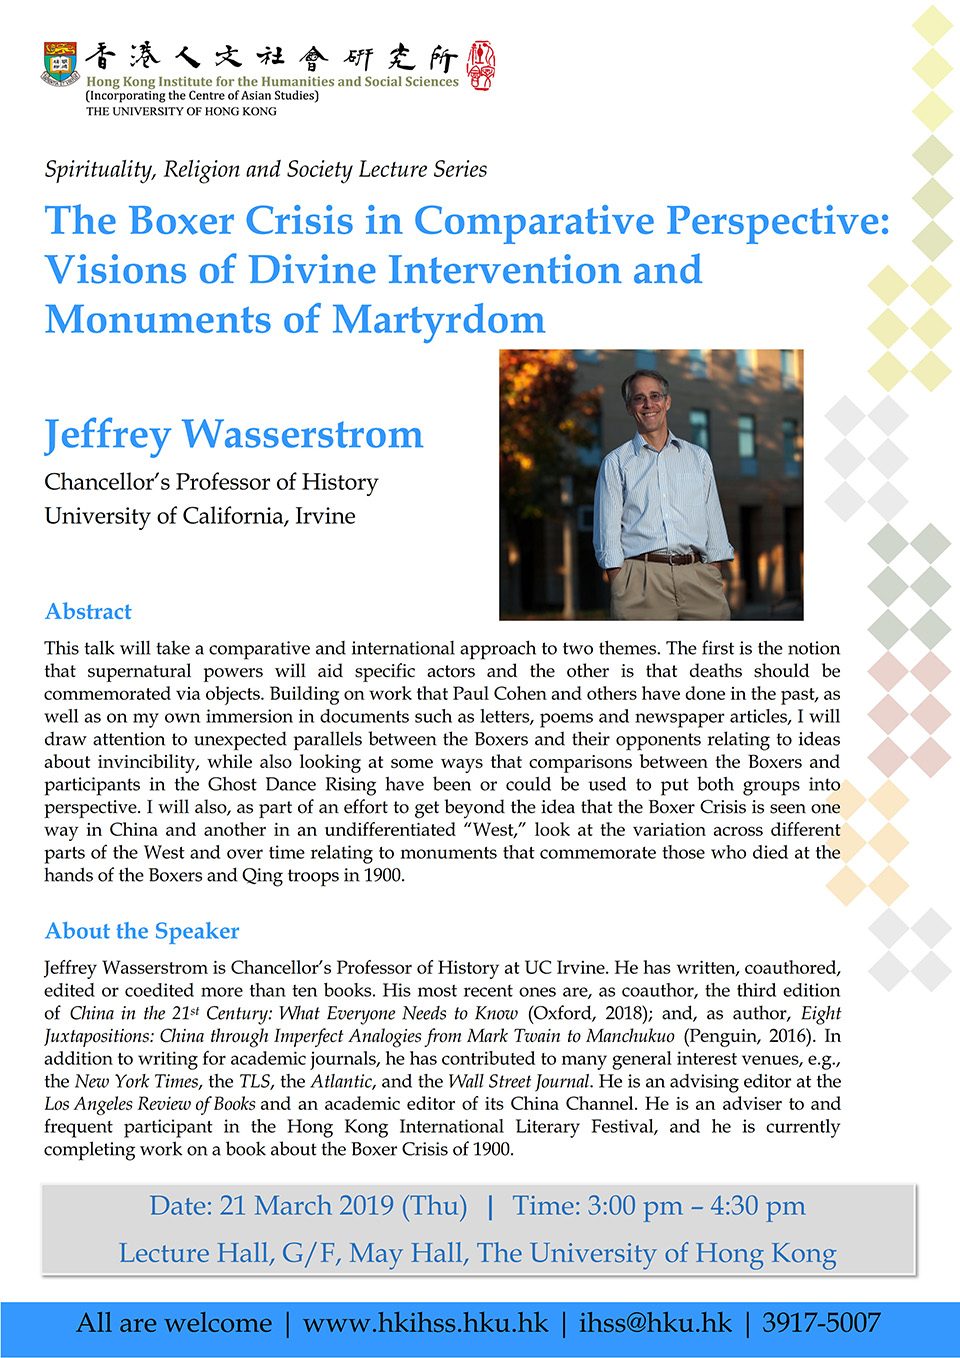 Spirituality, Religion and Society Lecture Series: The Boxer Crisis in Comparative Perspective: Visions of Divine Intervention and Monuments of Martyrdom by Professor Jeffrey Wasserstrom (March 21, 2019)